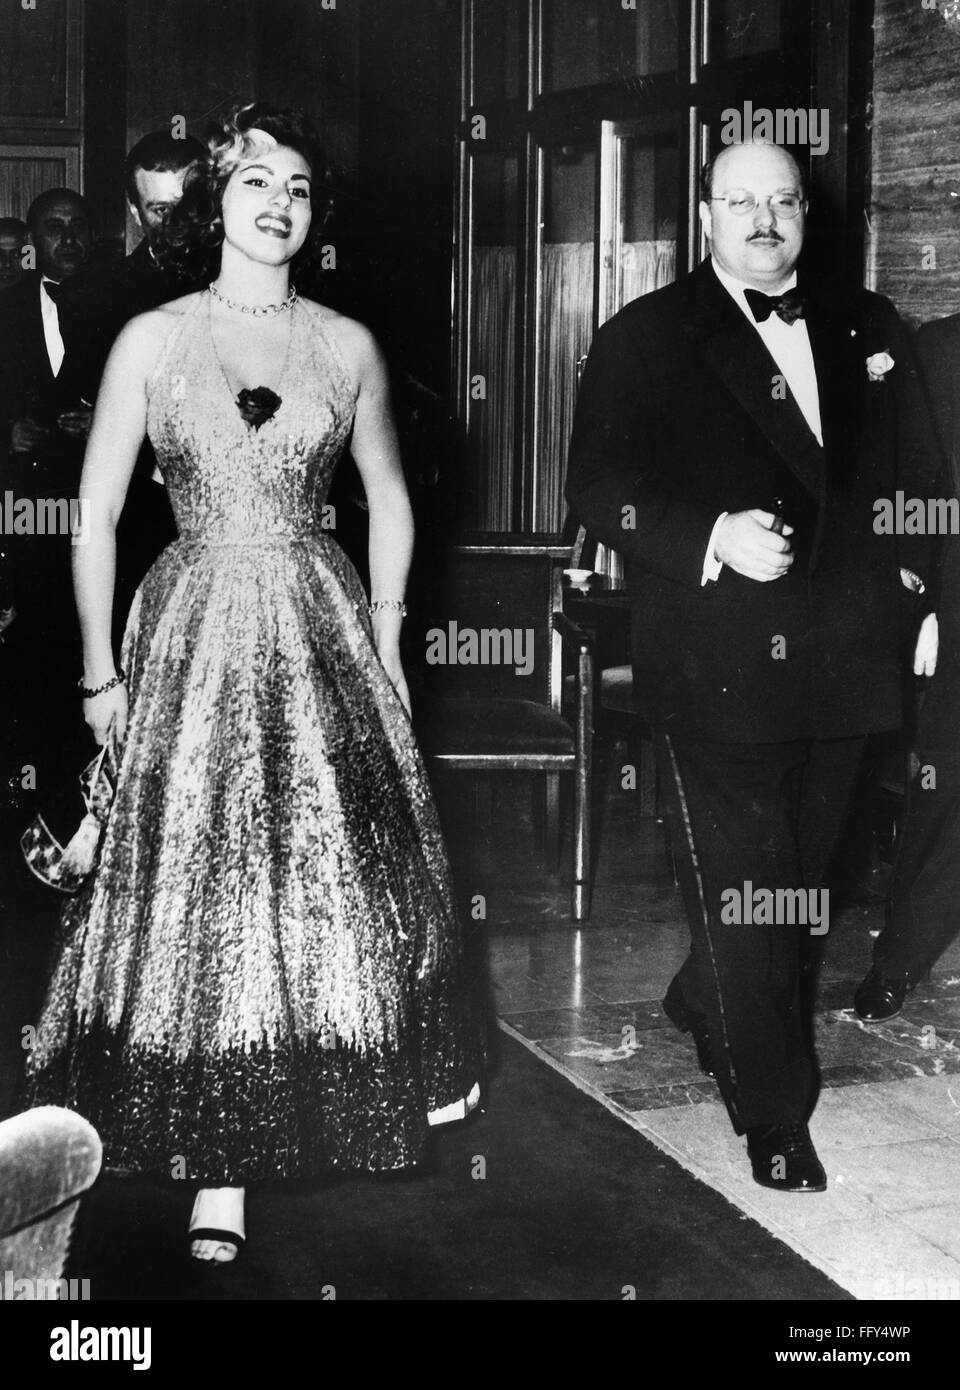 FAROUK I (1920-1965). /nKing of Egypt, 1936-1952. The exiled former king photographed in Monte Carlo with Italian opera singer Irma Capece Minutolo (1935- ), 16 February 1954. Stock Photo